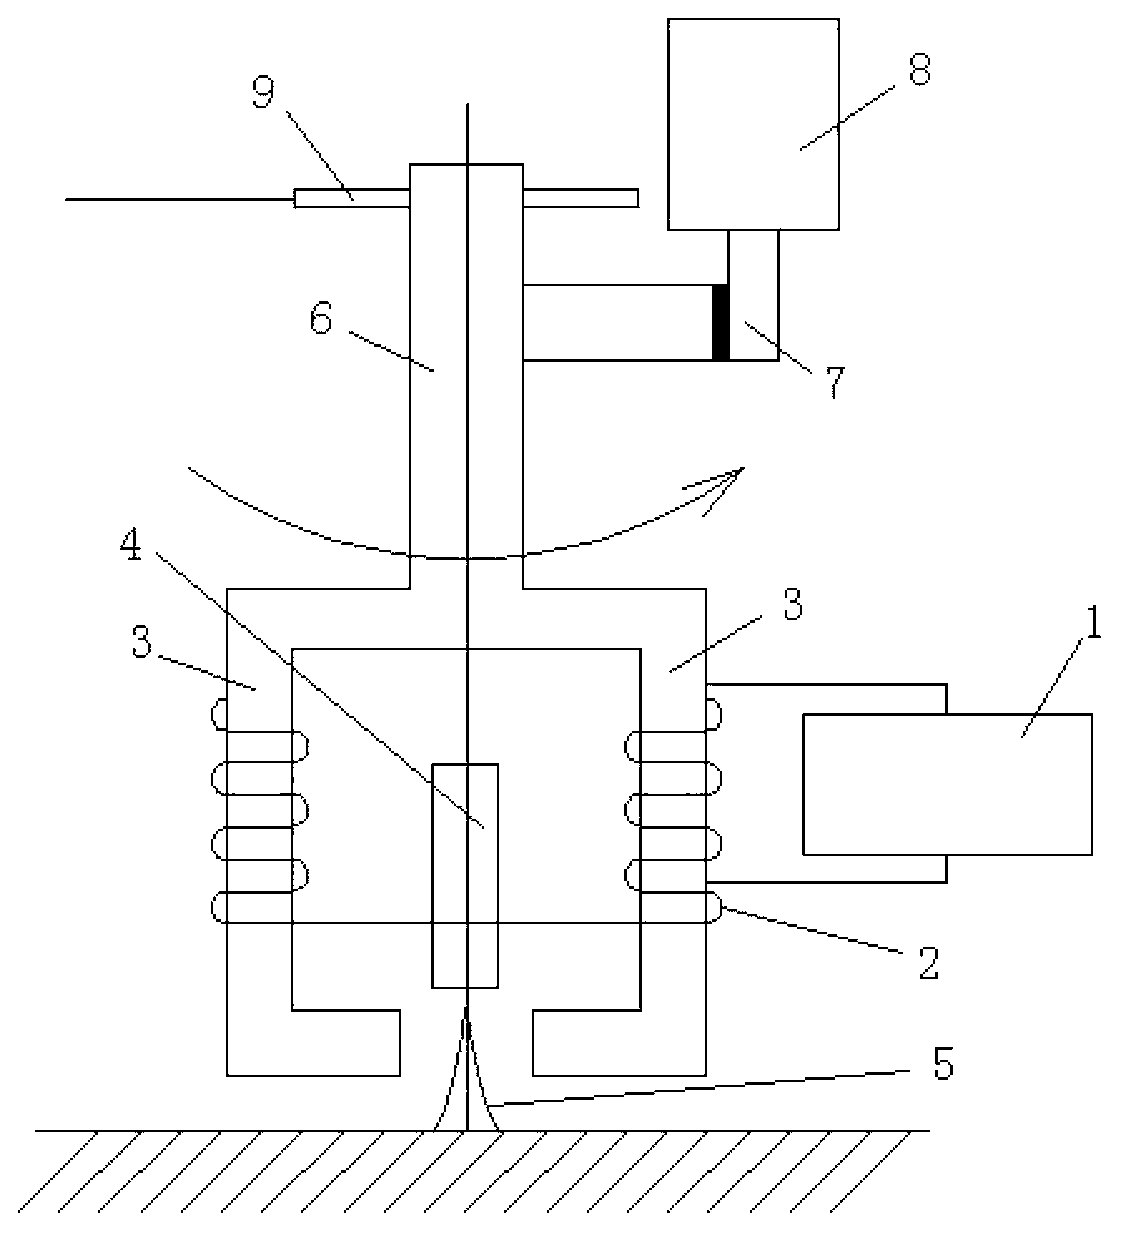 Magnetic control rotating arc sensing real-time weld joint tracking system and method